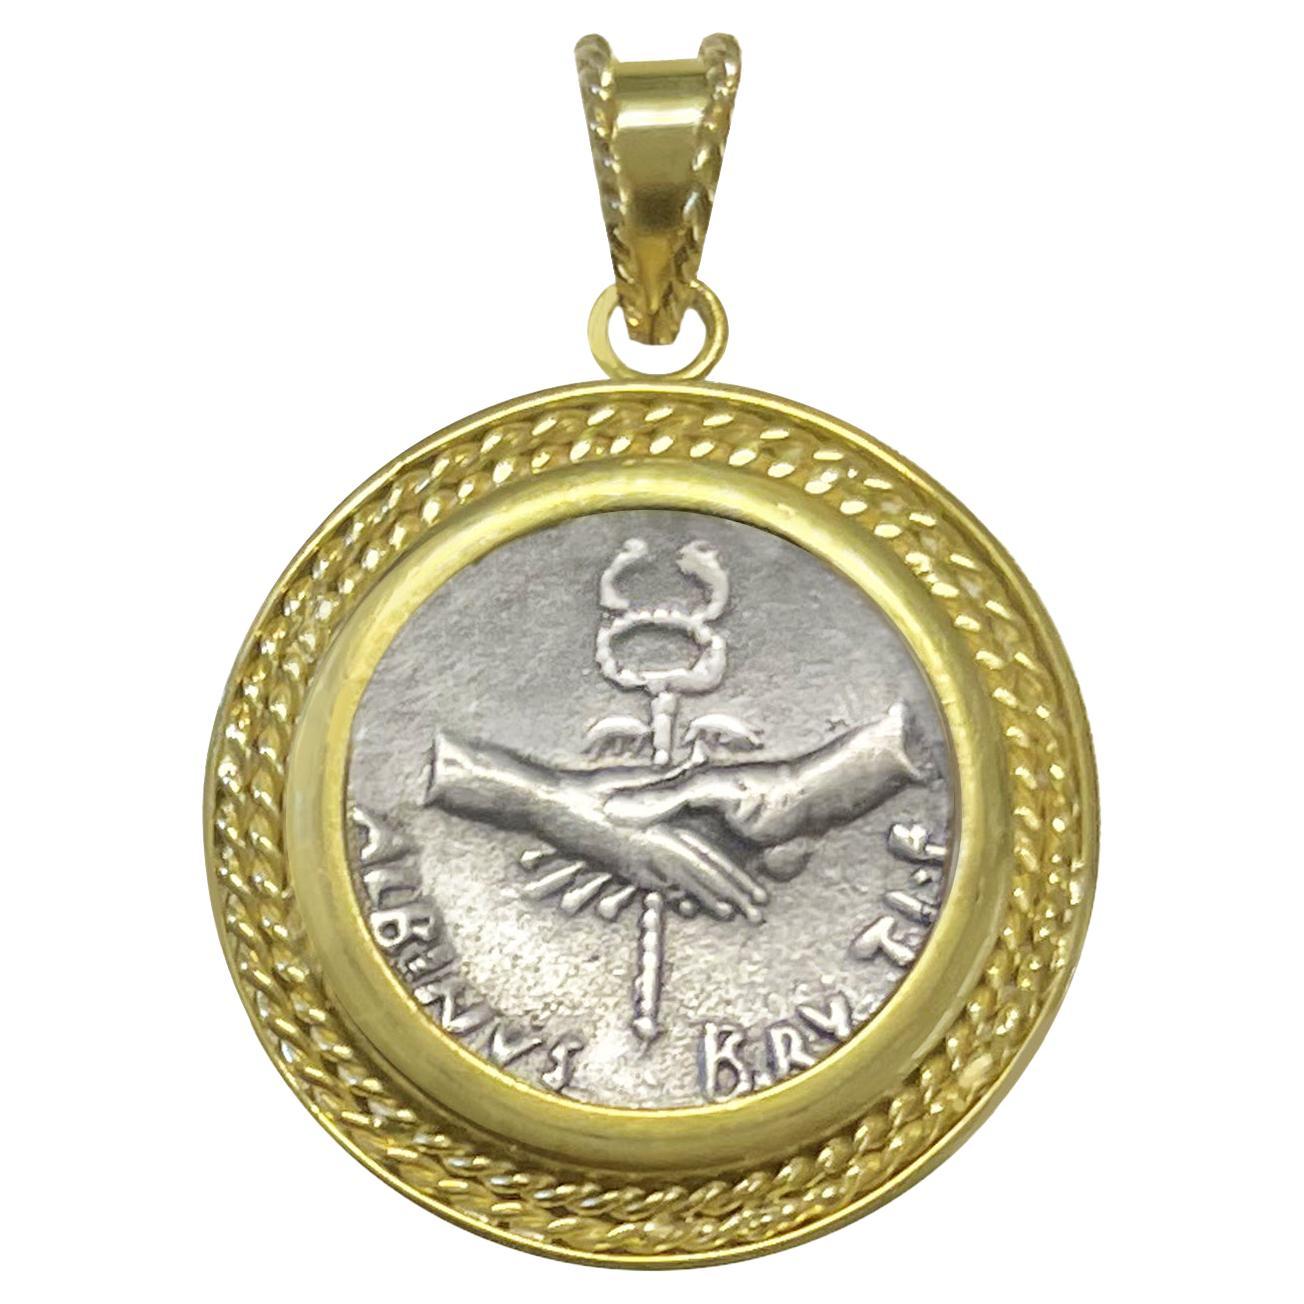 In this 18 Kt Gold pendant is set an authentic roman coin , minted by Albinus Bruti  ( 48 BC ) , depicting a Dextrarum iunctio: clasped hands holding winged caduceus. 
The hand shaking gesture, Dexiosis for the Greeks or Dextrarum Iunctio for the